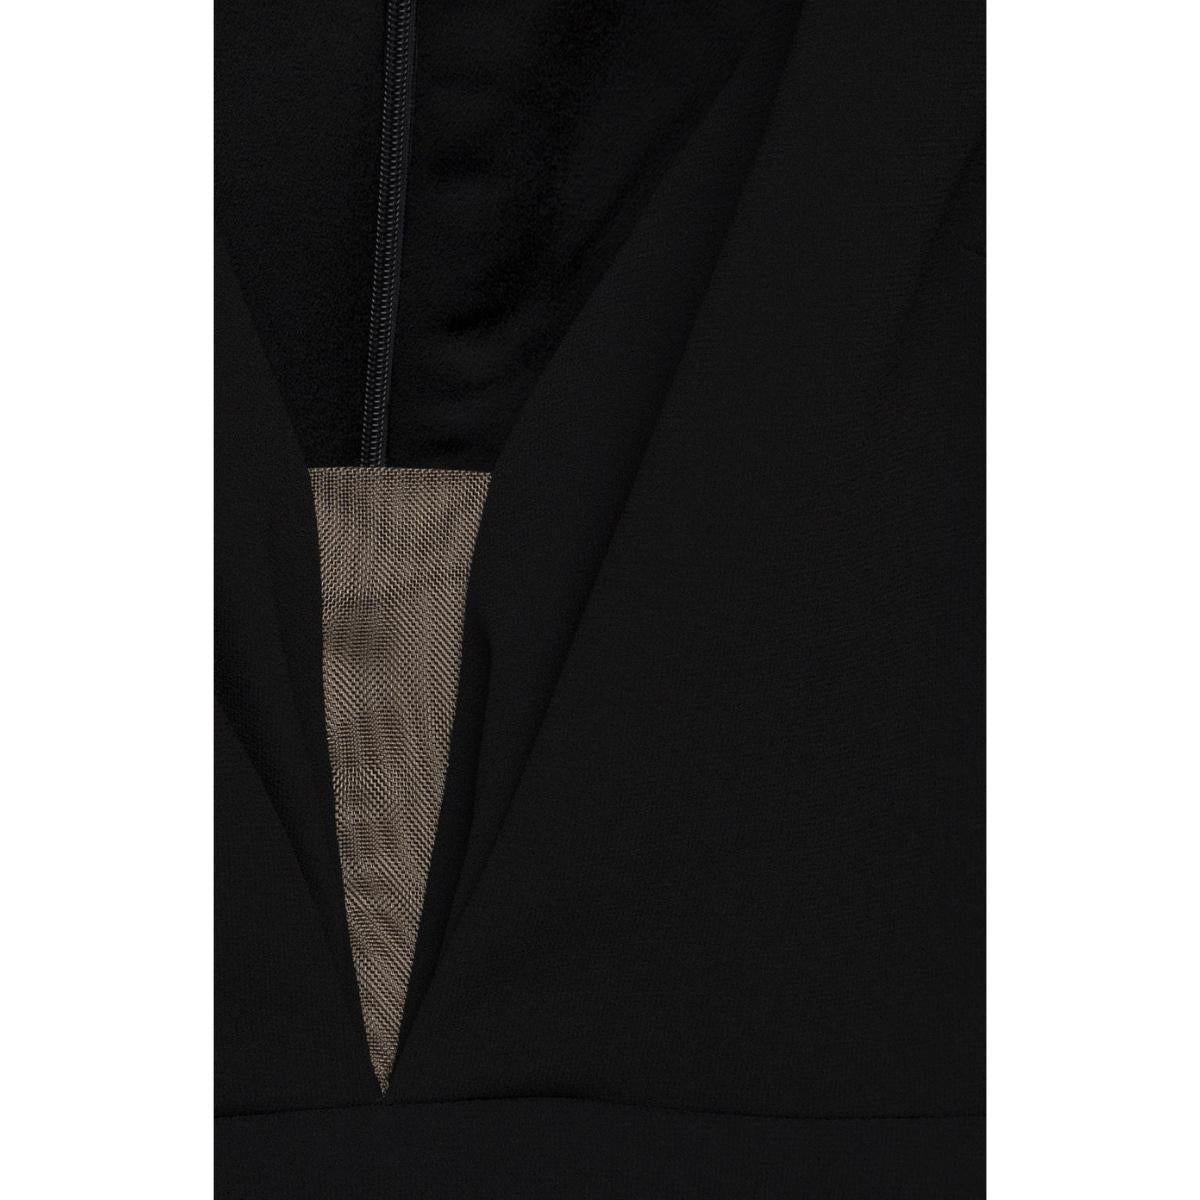 V neckline.
Long sleeves.
Structured shoulders.
Column silhouette.
Floor length.
Back zip.
Composition: 82% triacetate, 15% polyester
Lining: 93% polyester, 7% spandex.
Dry clean.